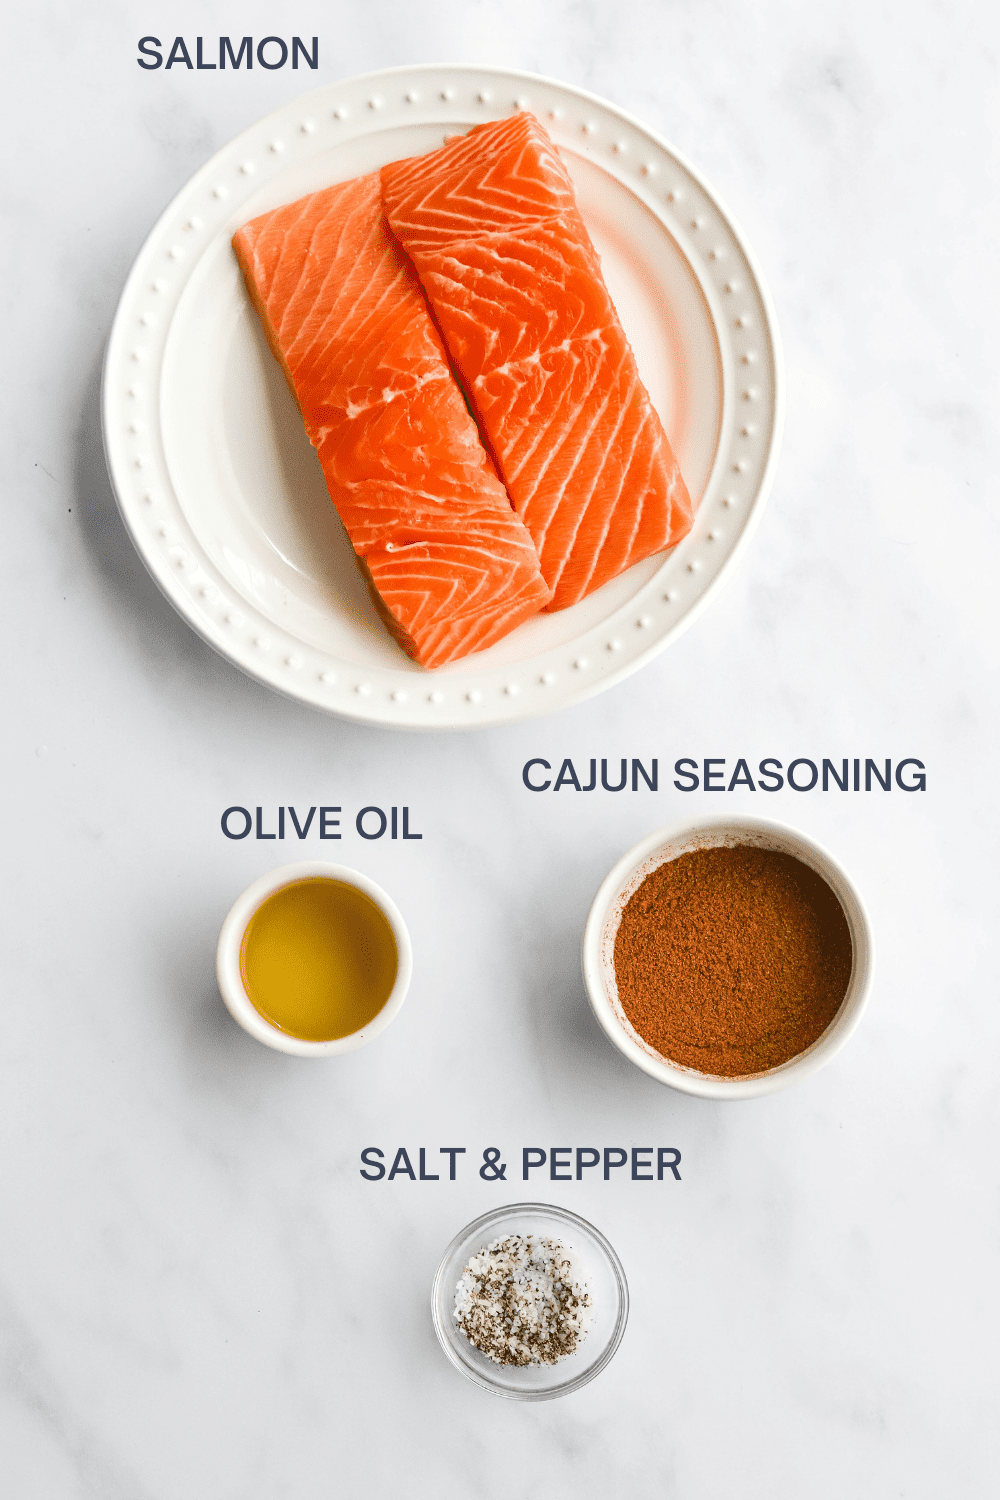 Raw salmon filets on a white plate with a round white bowl of cajun seasoning, bowl of olive oil and a bowl of salt and pepper in front of it. 